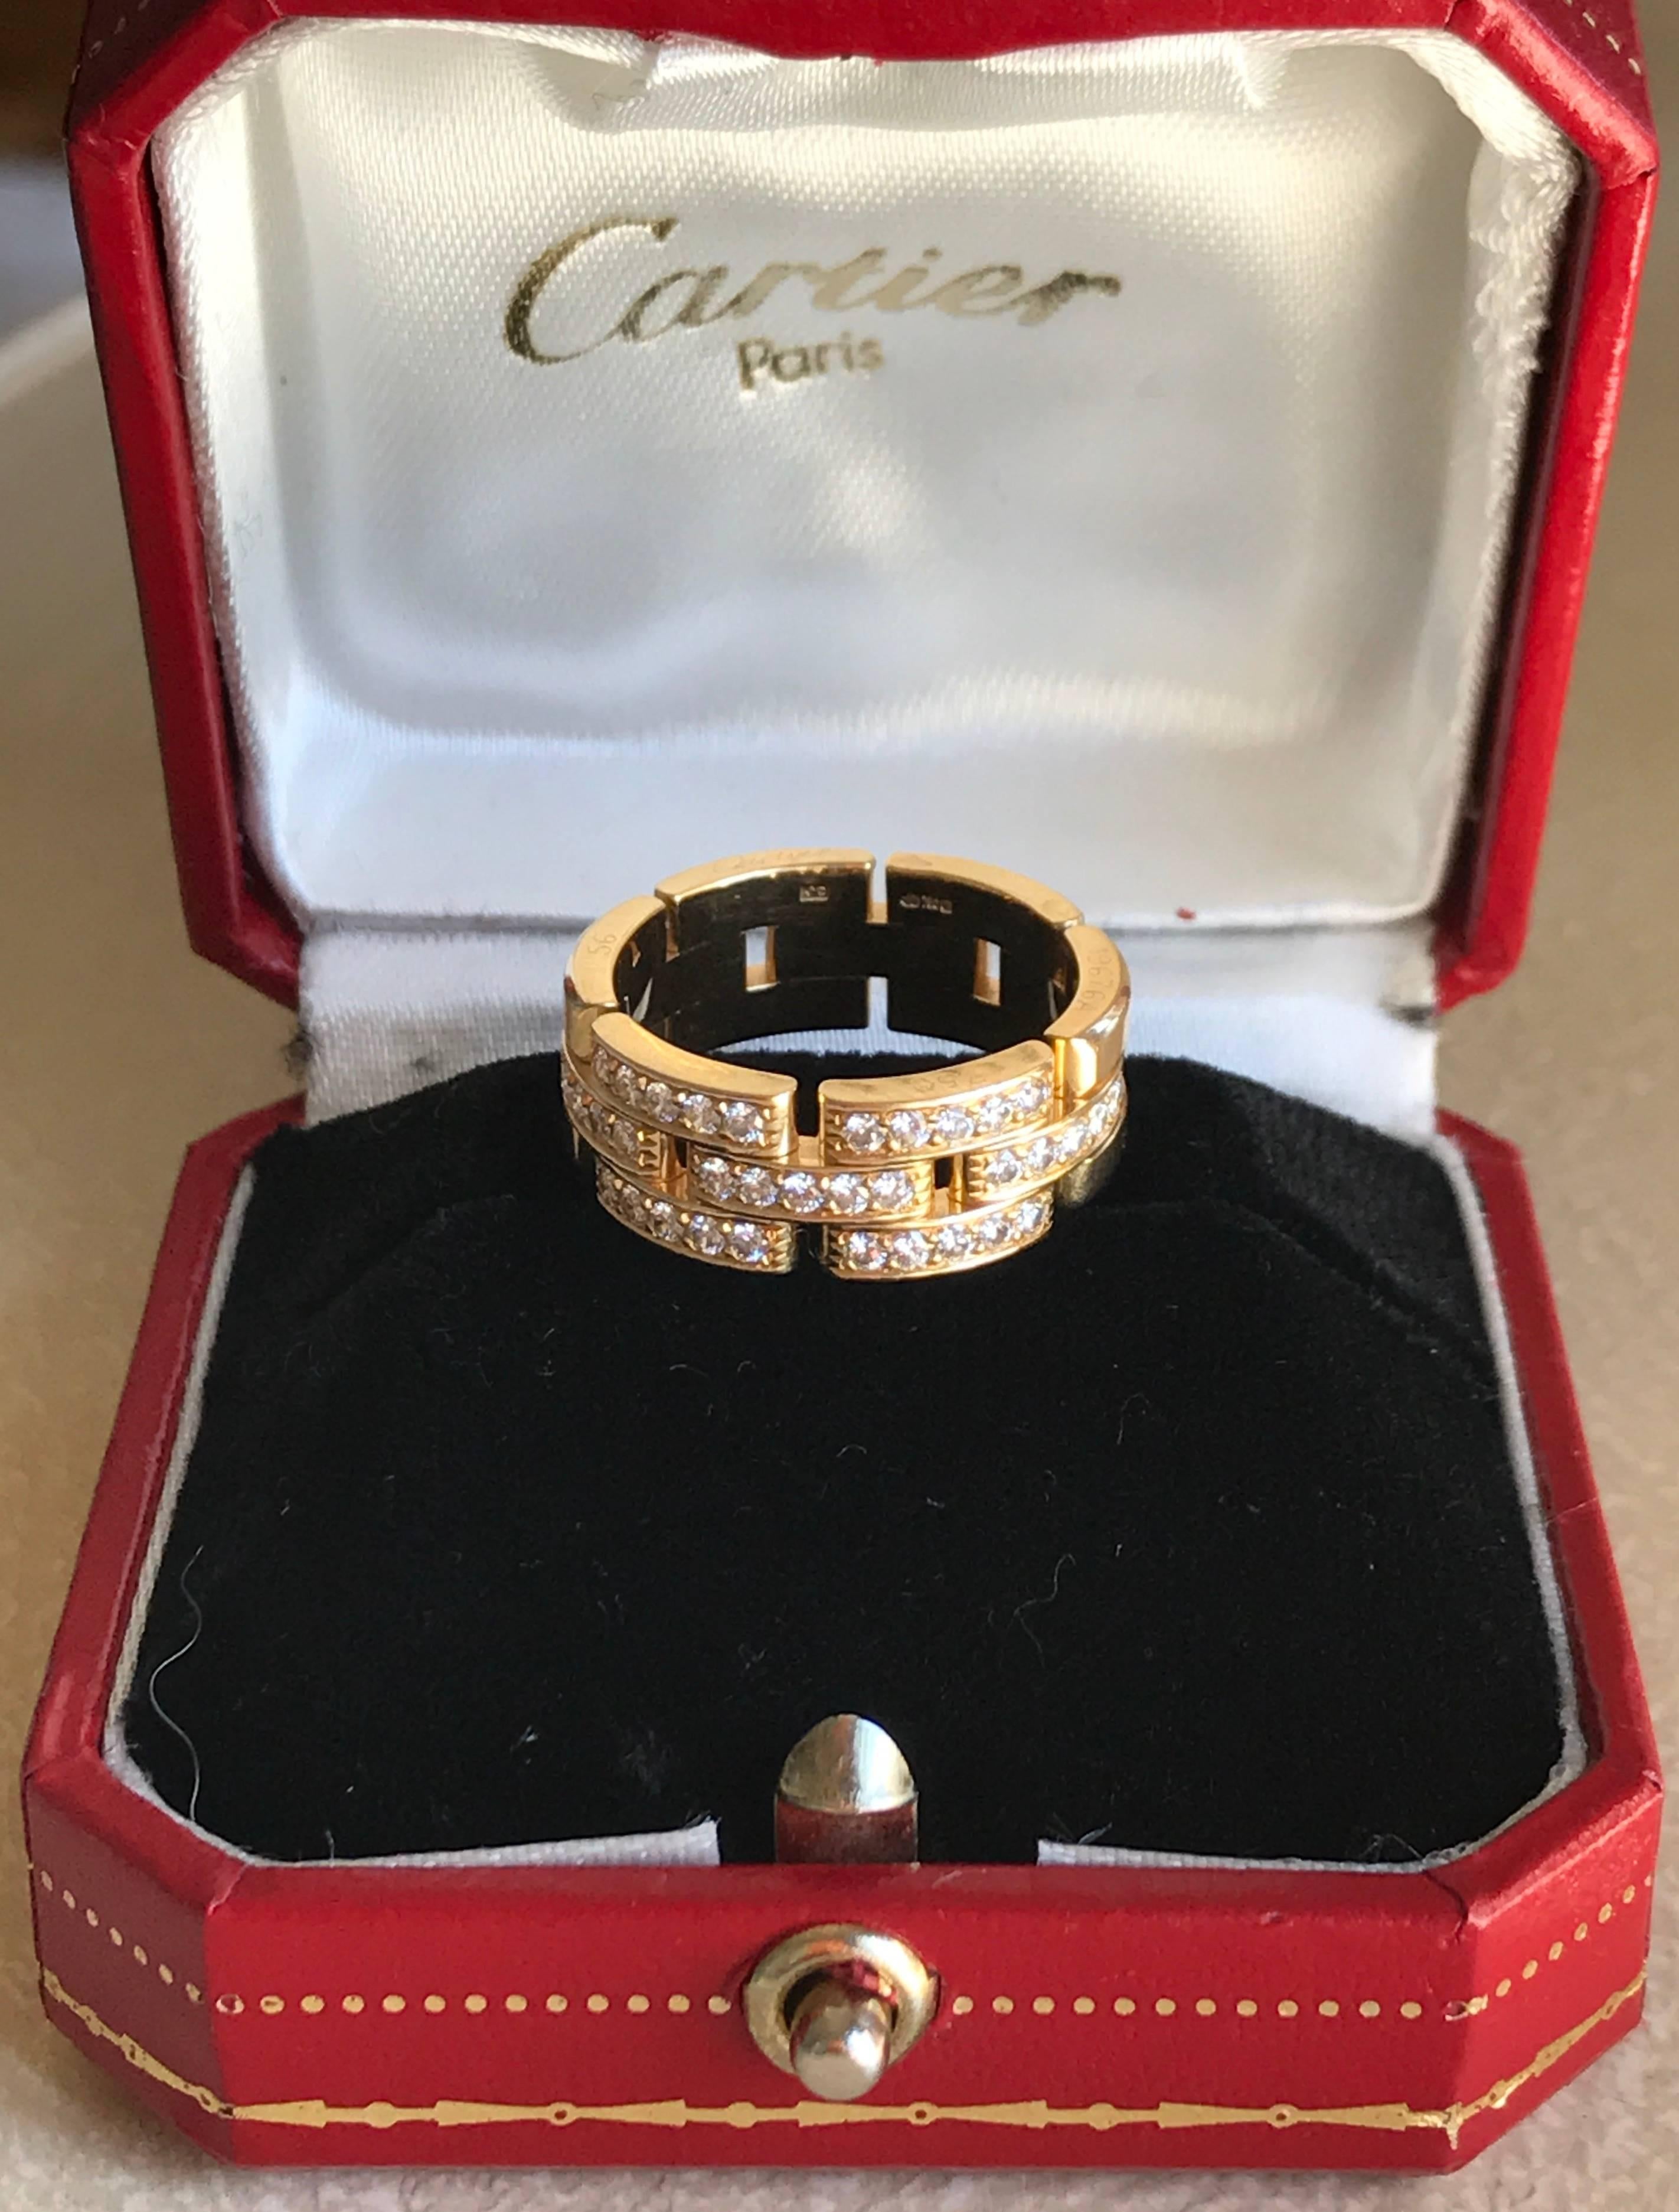 Cartier Maillon Panthere three row half diamond ring set in 18k yellow gold. The is from the Cartier Panthere Links & Chains collection and features 35 pave set brilliant cut round diamonds in a link style band. The ring currently retails on